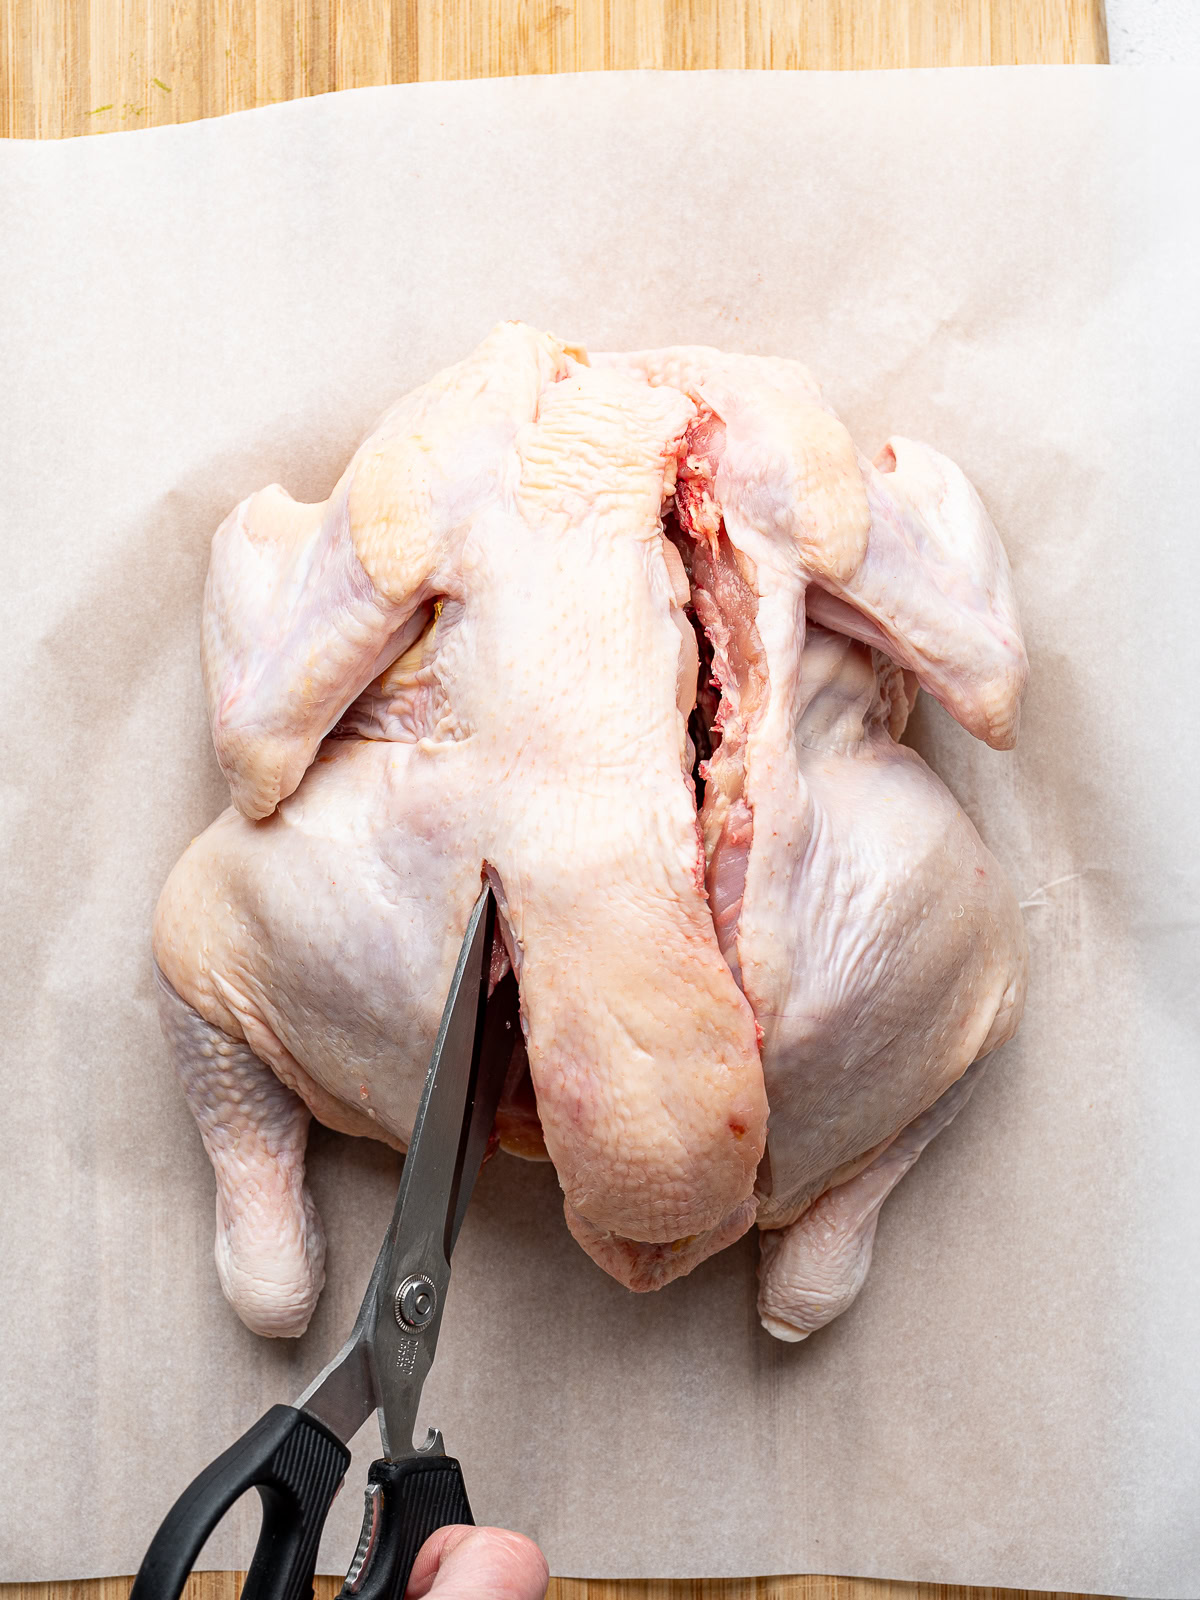 Cutting out the other side of the backbone of a whole chicken with kitchen shears.